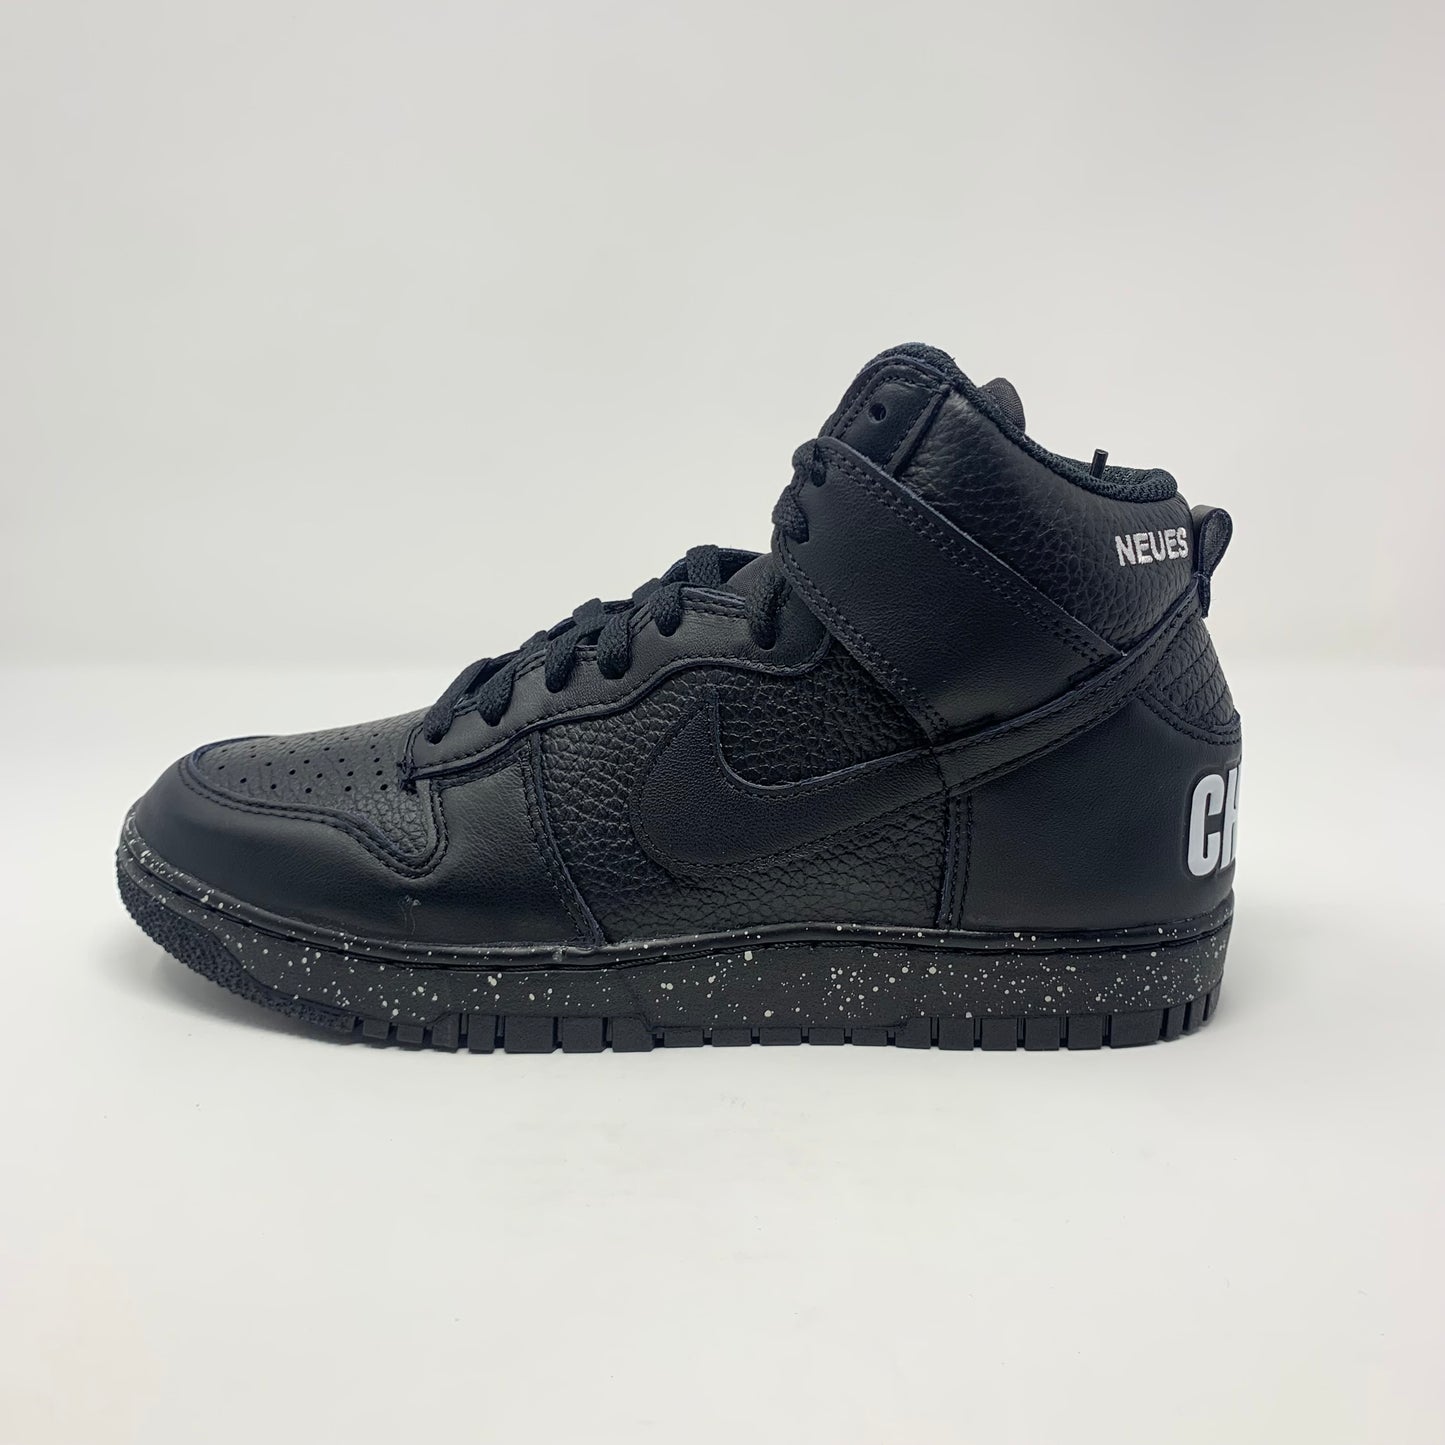 Nike Dunk High “Undercover Chaos Black”